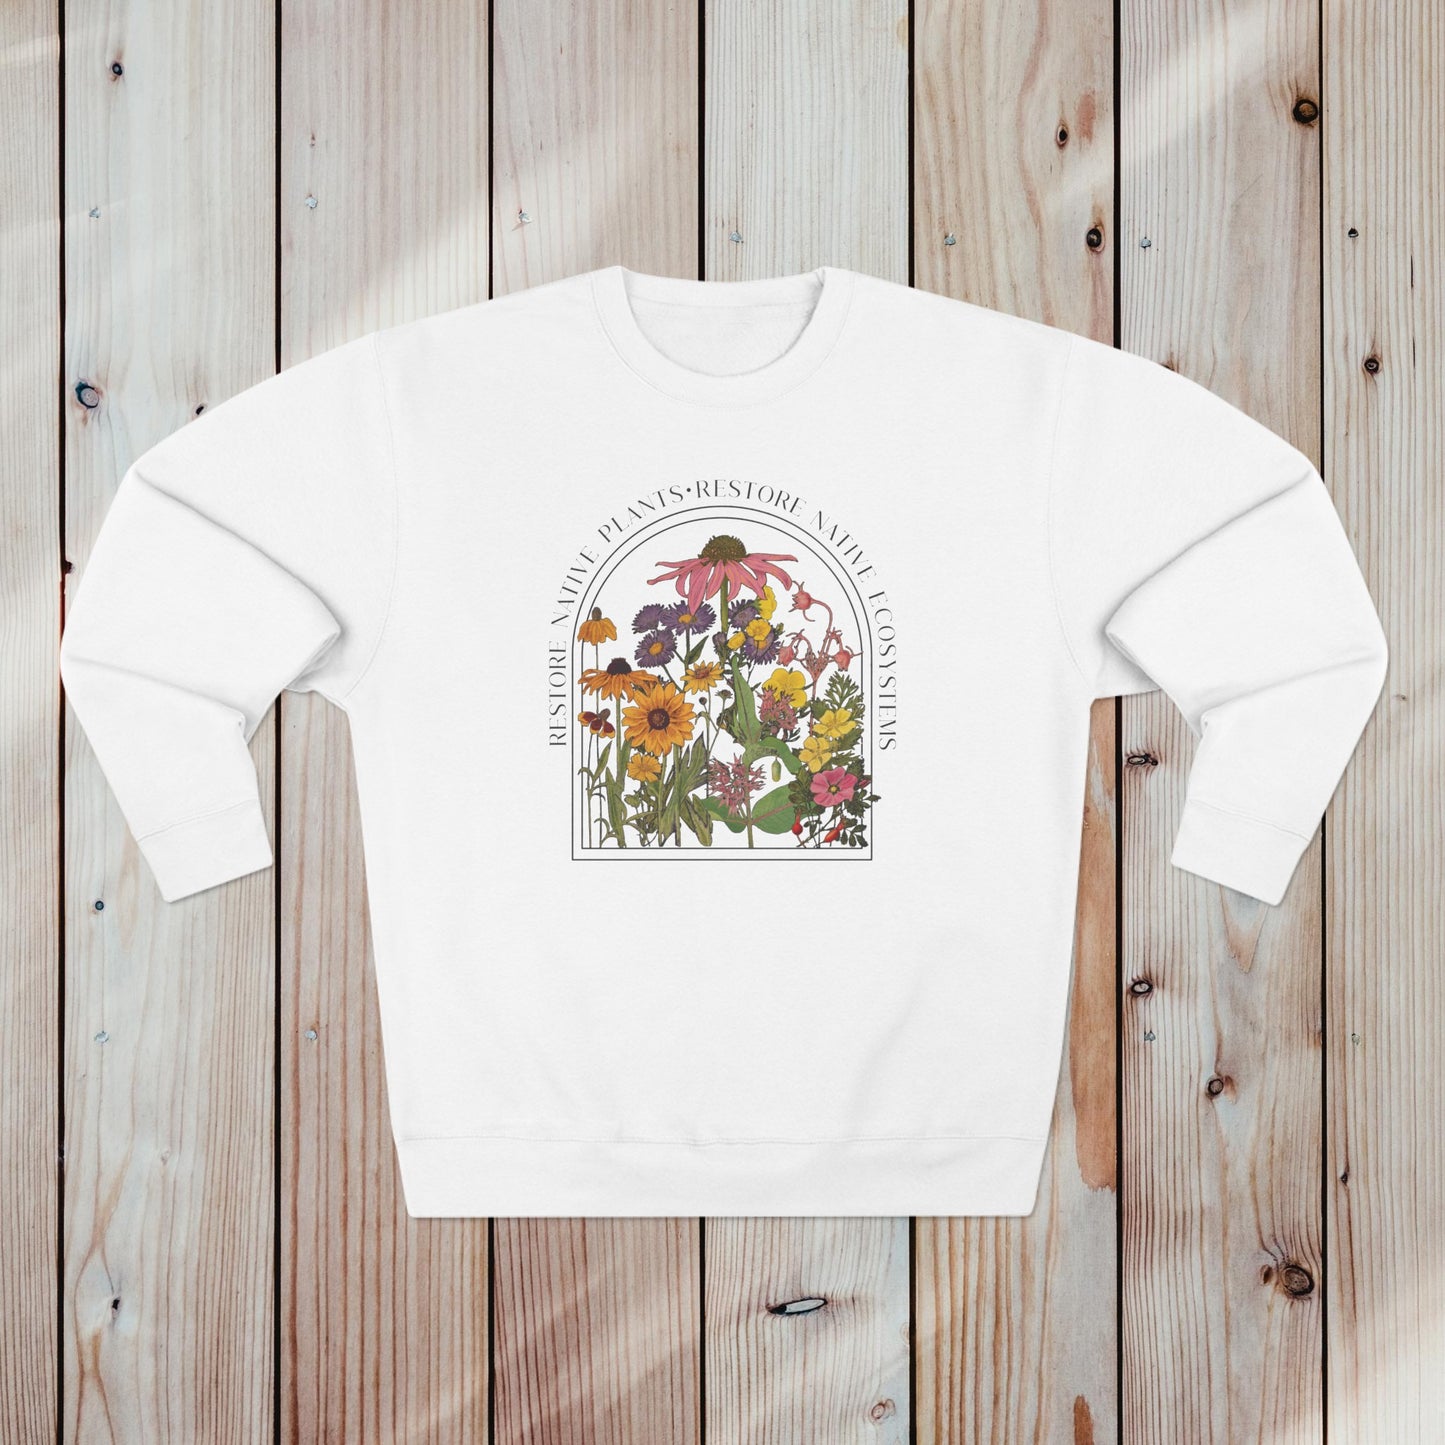 Save Native Plants Unisex Sweatshirt for Conservation, Ecology, Environment. For Nature Lovers, Naturalists, Gardeners